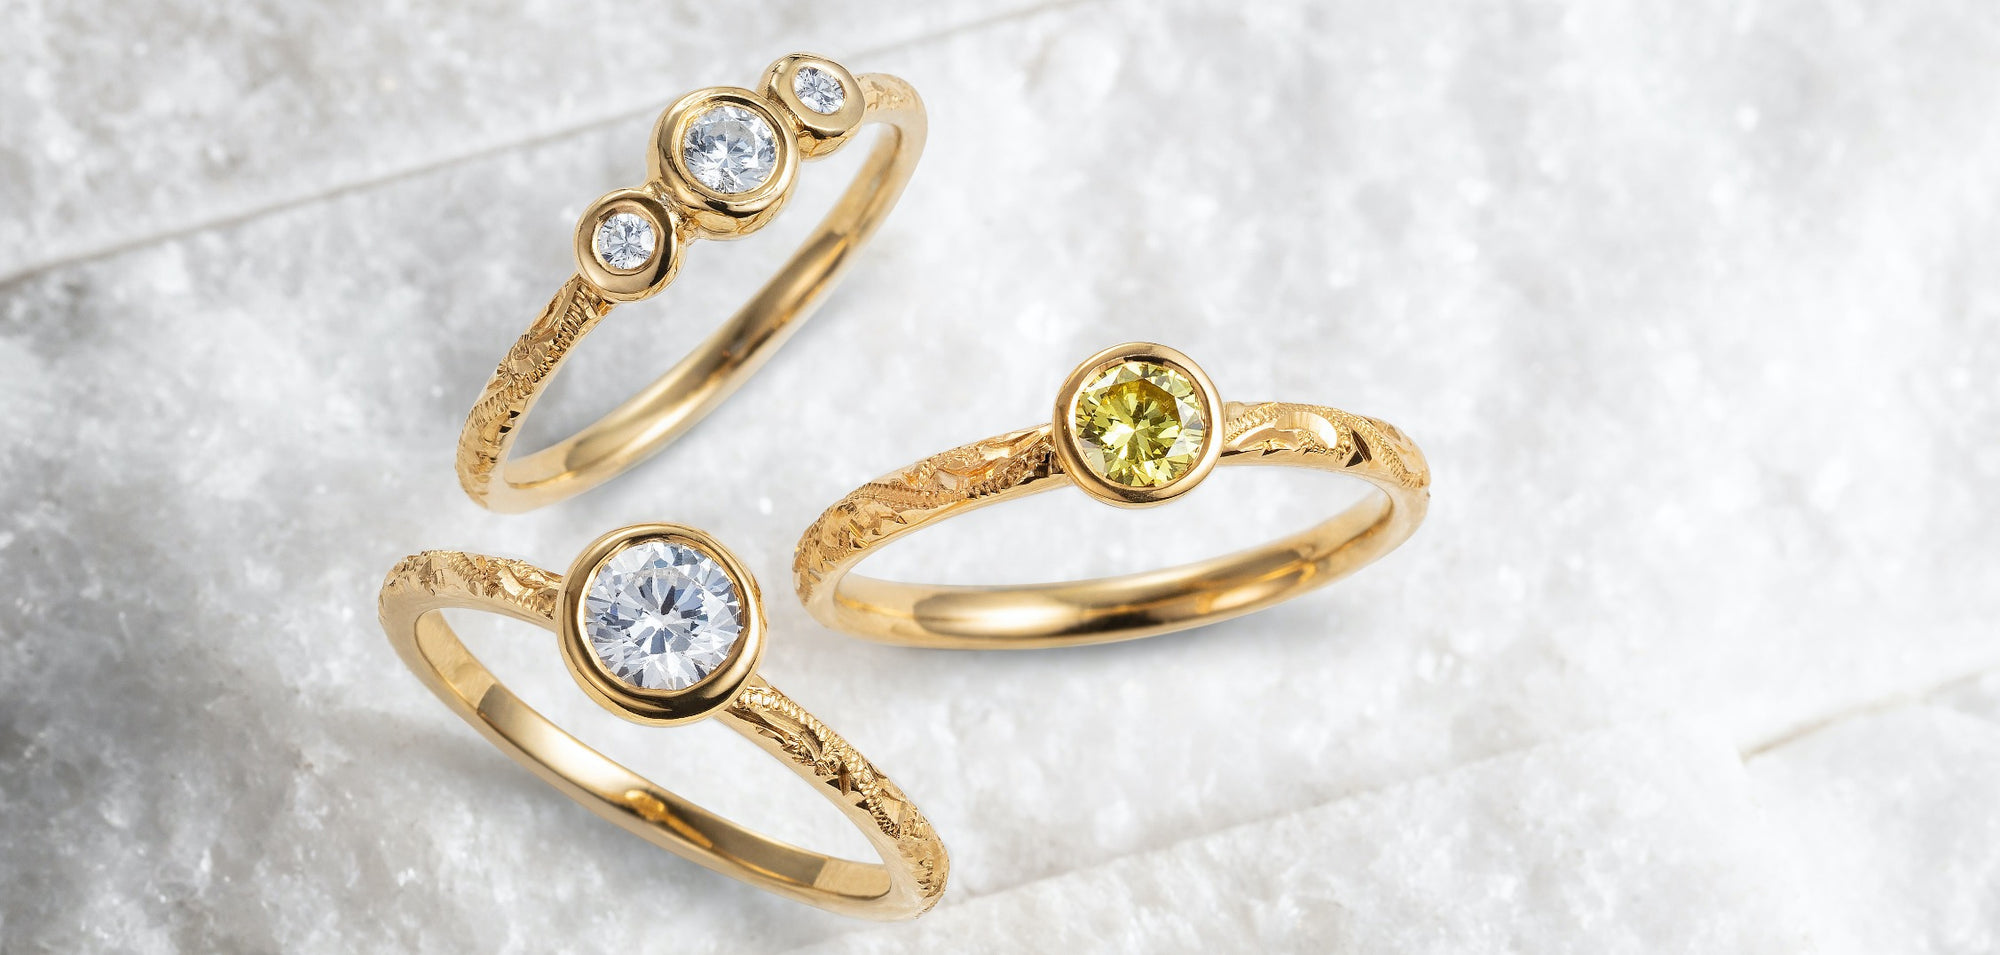 Engagement rings from our Hera collection, characterised by hand-engraved recycled gold bands and lab-grown diamonds